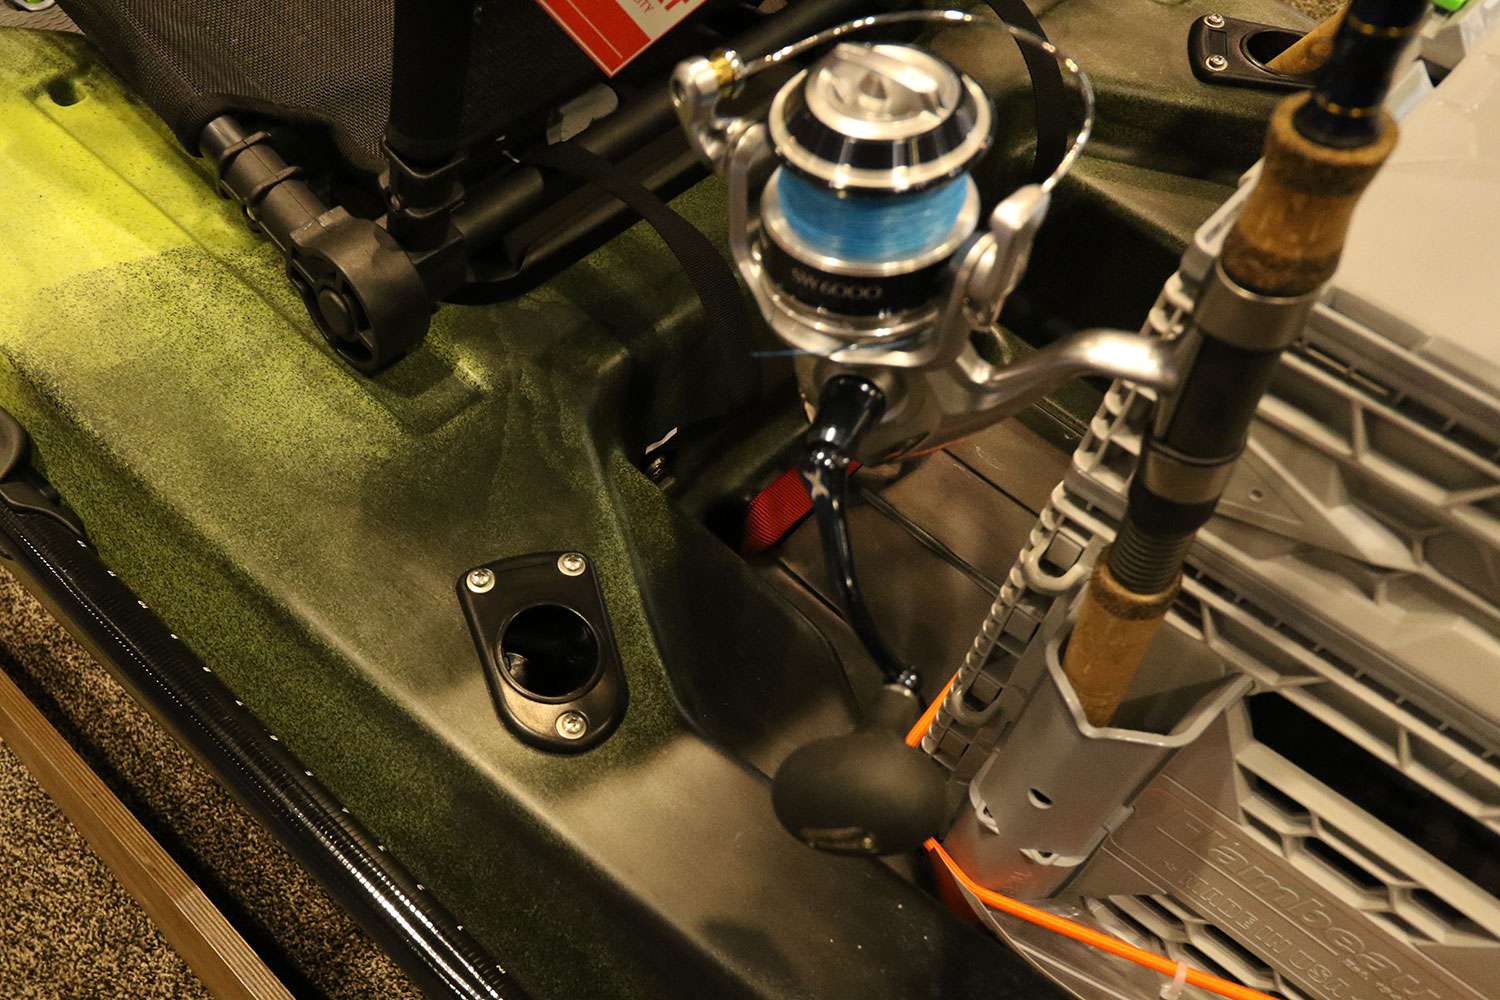 Rod holders are built-in on the Flambeau box, and those compliment the rod holders that come standard with the kayak.